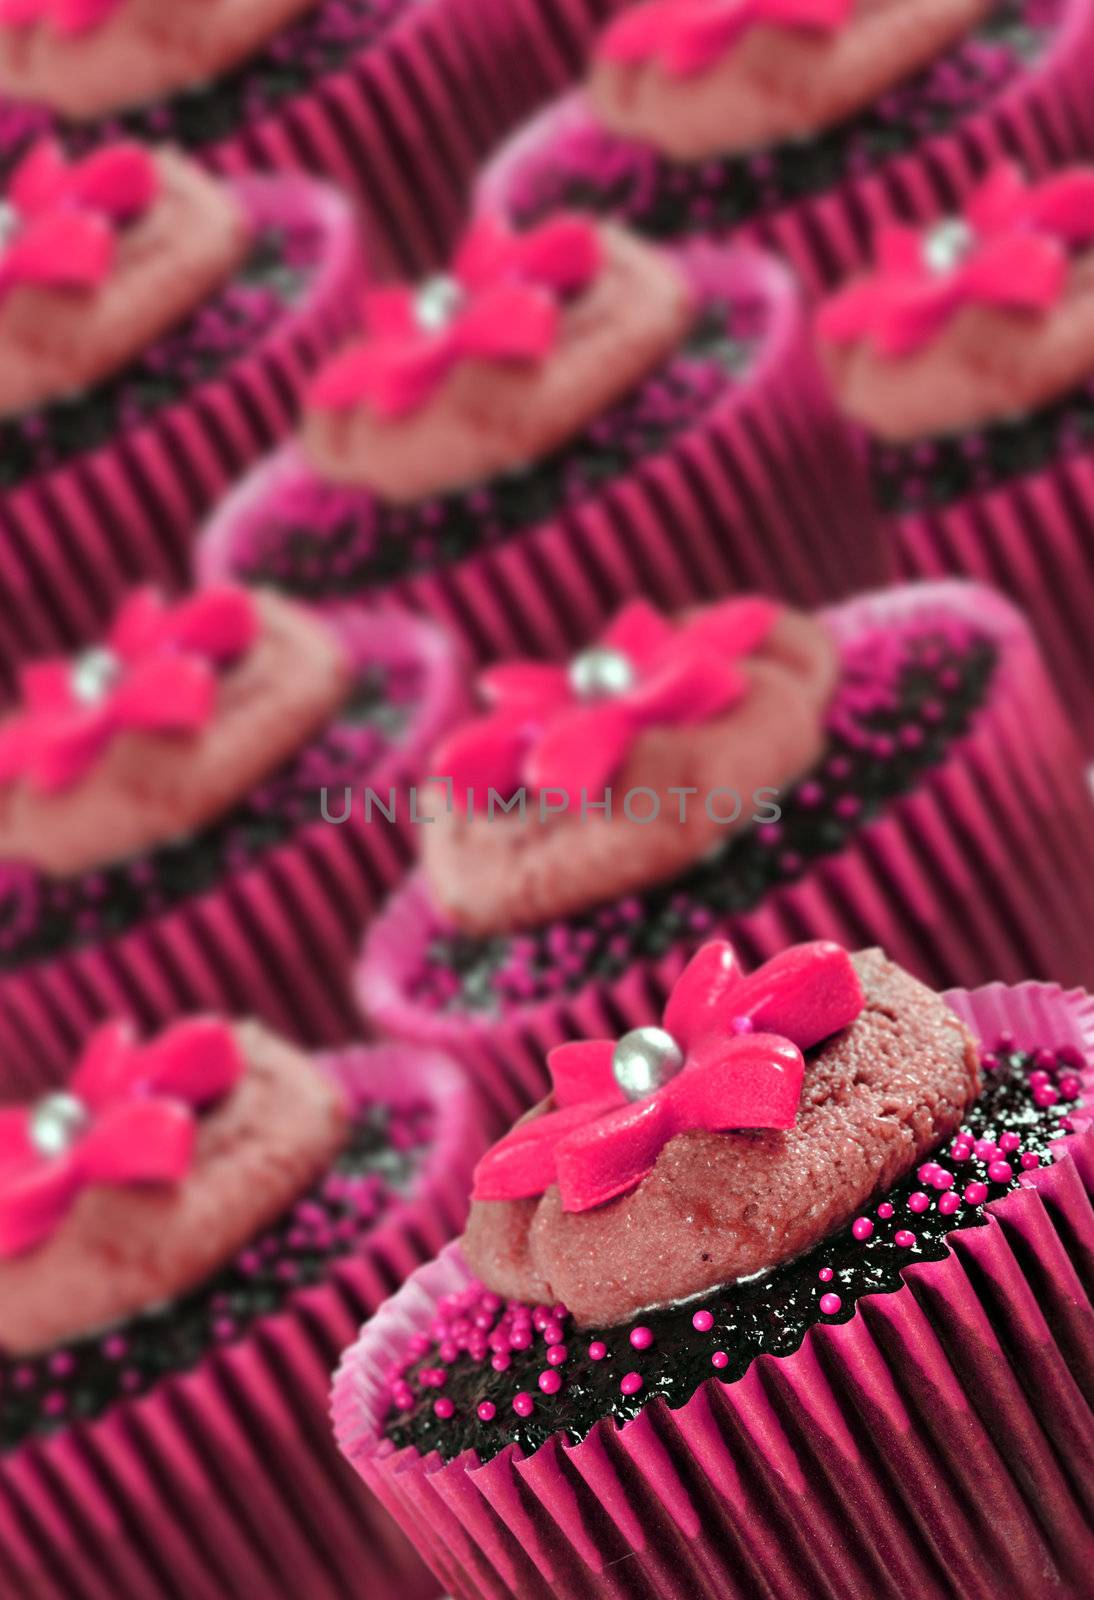 Lovely chocolate cupcakes decorated in pink